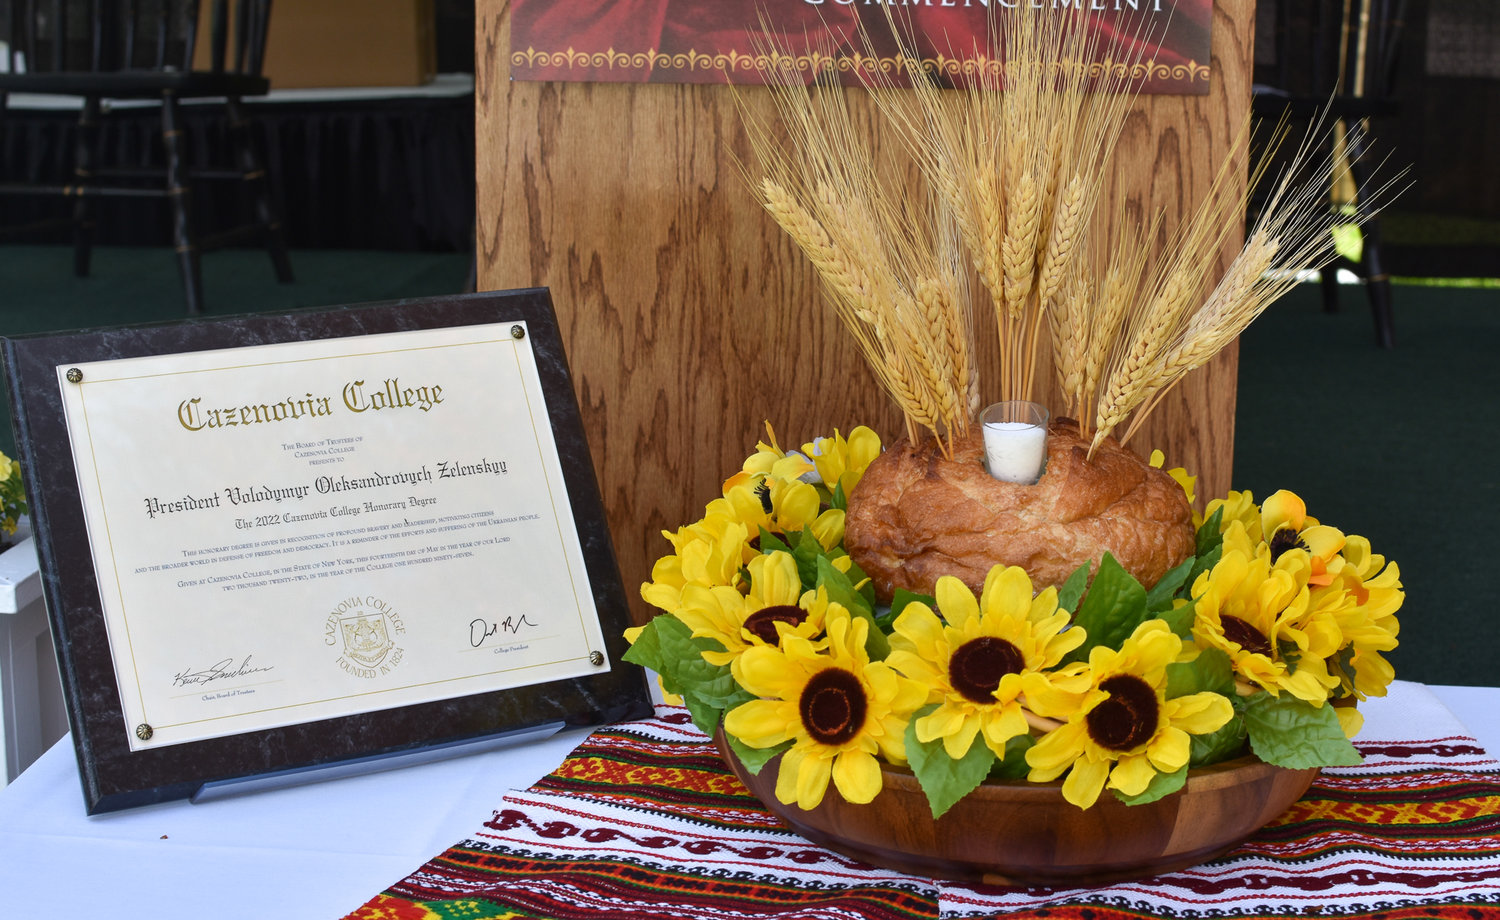 In the spirit of Ukrainian tradition, an arrangement consisting of bread, wheat, and salt along with sunflowers was on display during the graduation ceremony to symbolize Cazenovia College's support of democracy and peace.